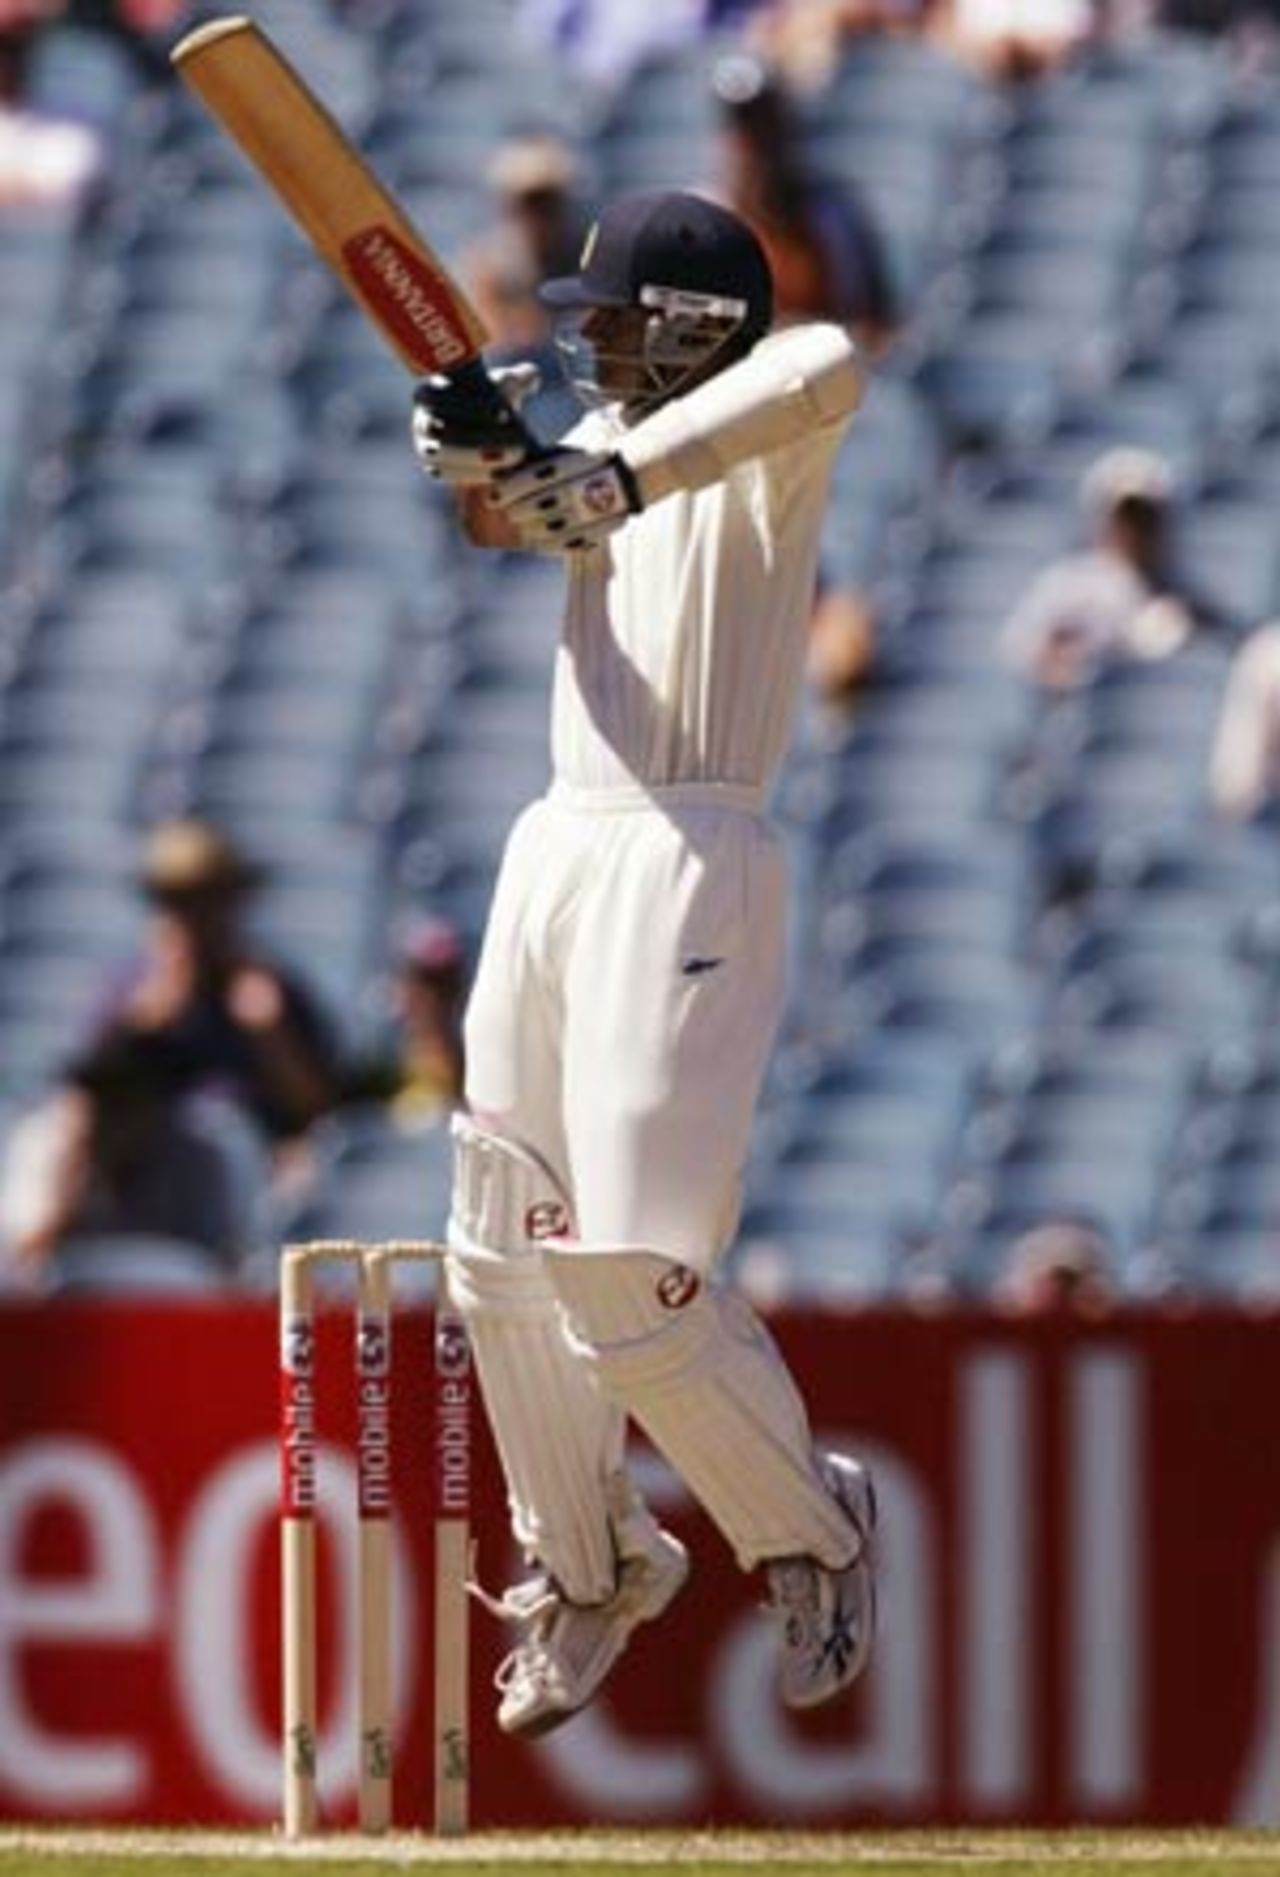 Rahul Dravid leaps up and cuts, Australia v India, 3rd Test, Melbourne, 4th day, December 29, 2003